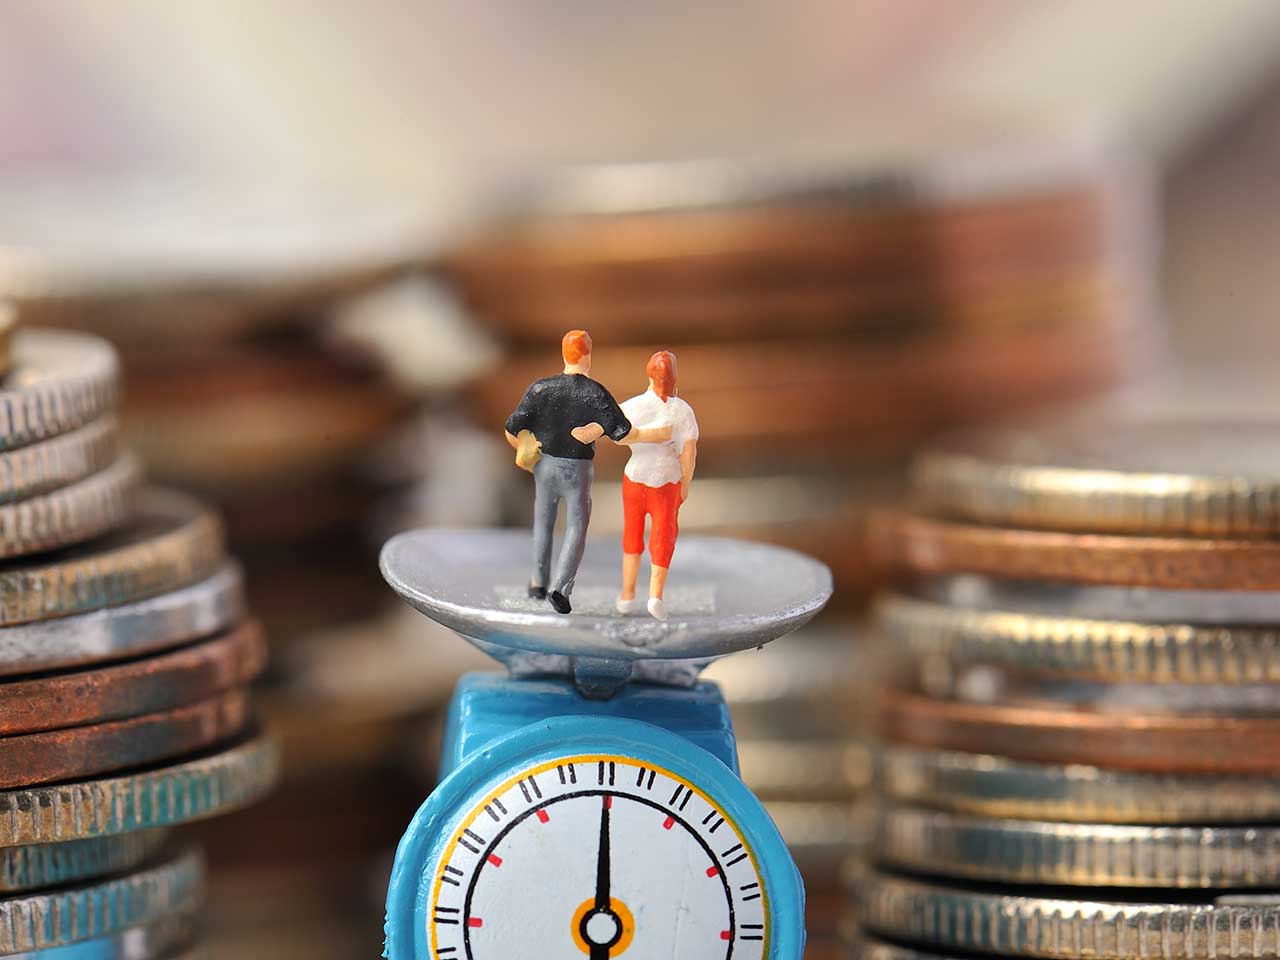 Miniature figures standing on scales surrounded by cash